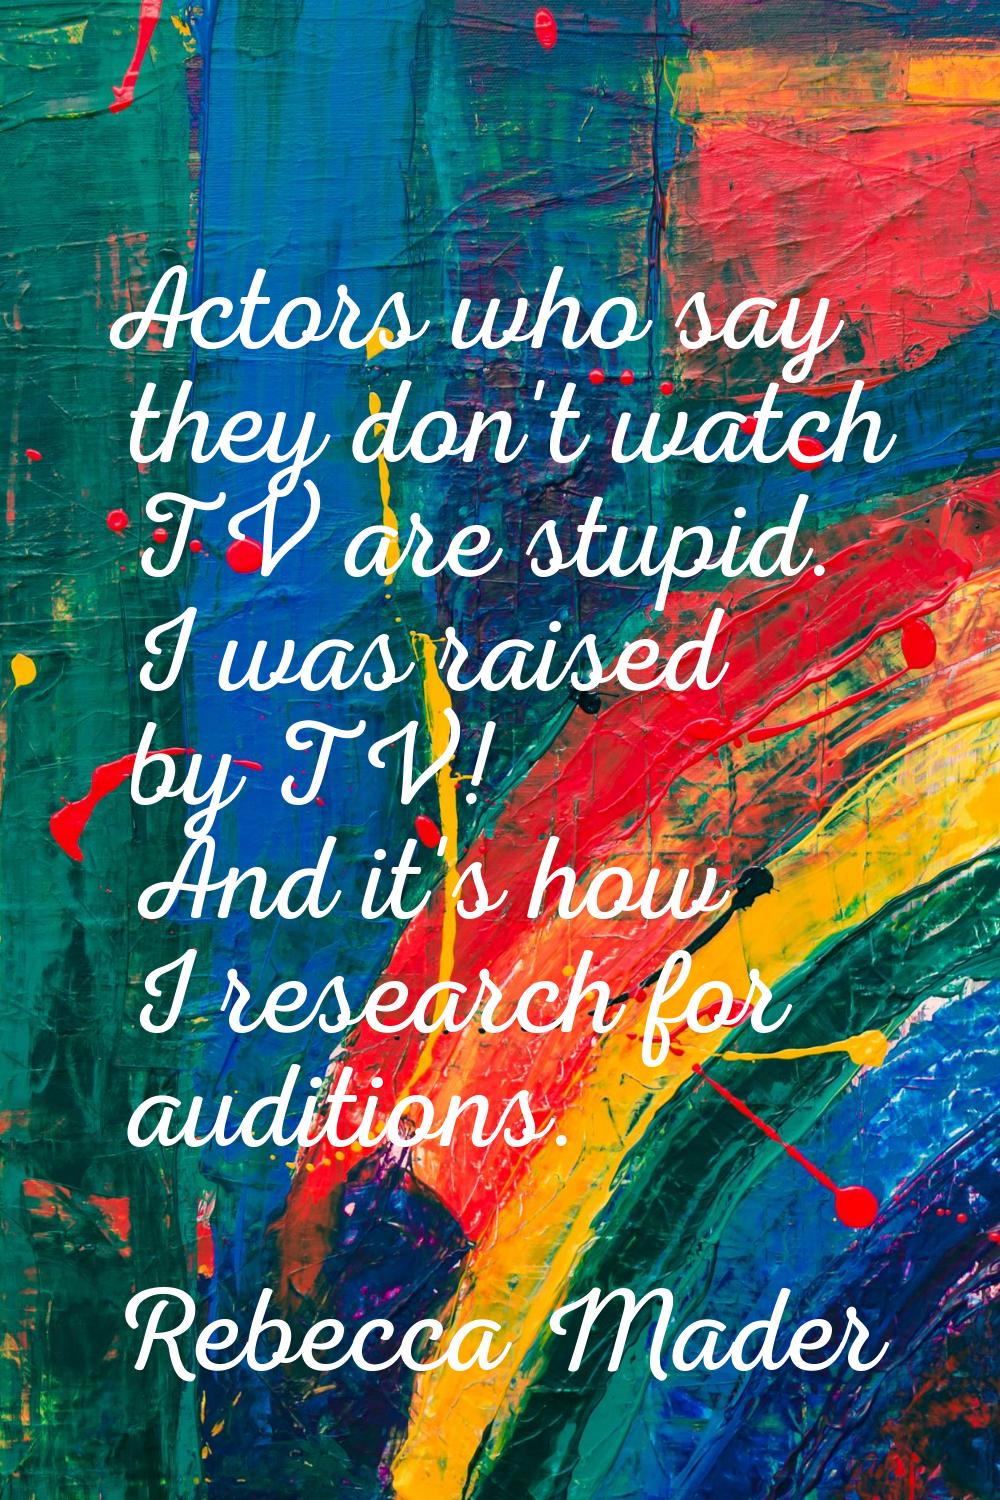 Actors who say they don't watch TV are stupid. I was raised by TV! And it's how I research for audi